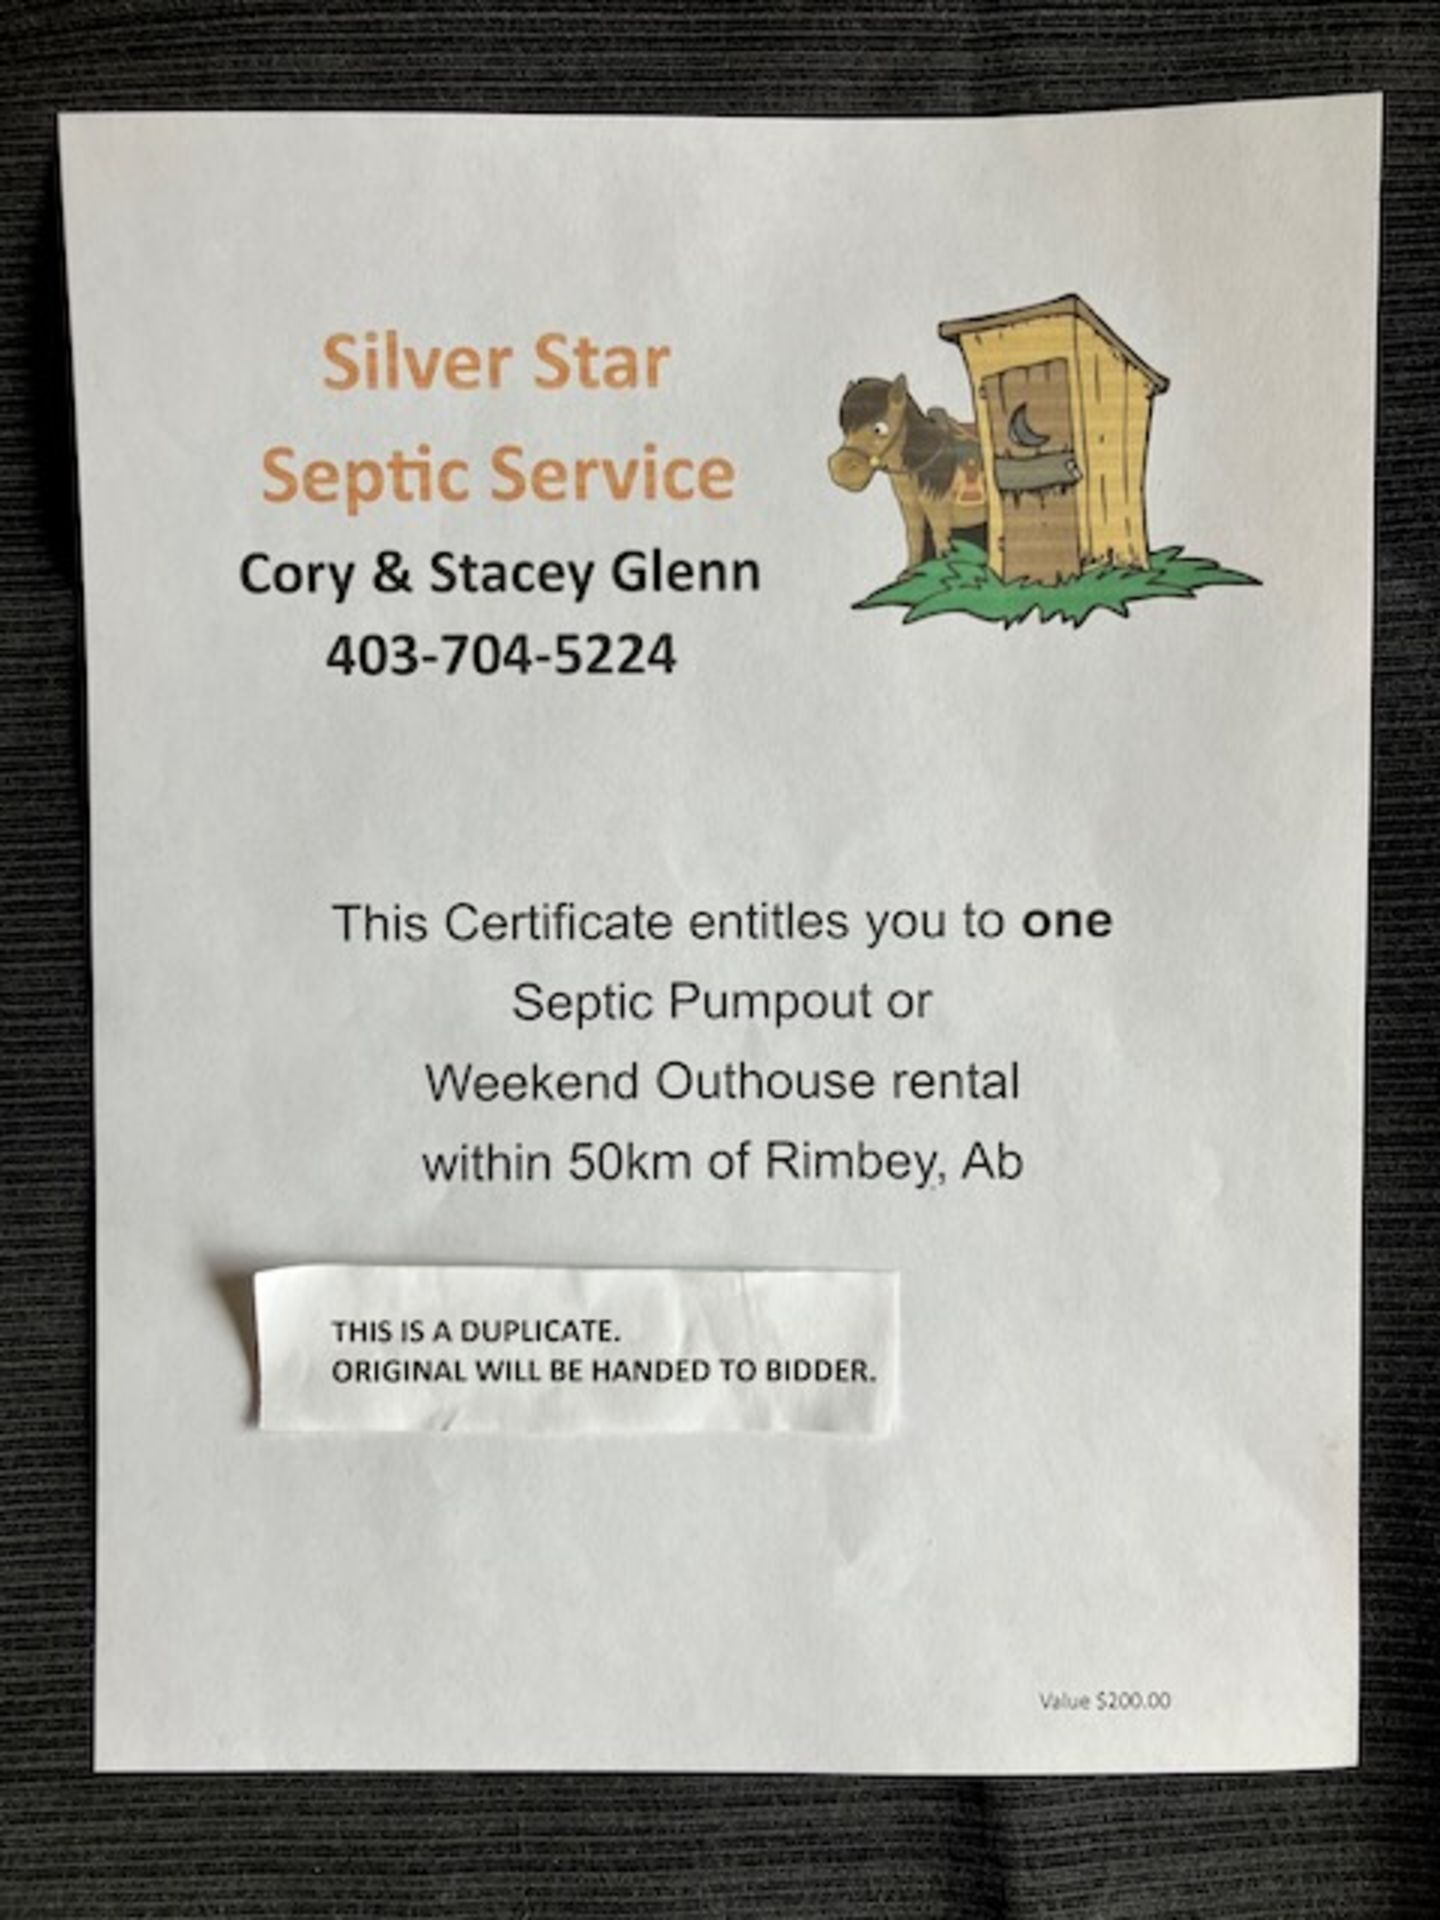 SILVER STAR SEPTIC SERVICE GIFT CERTIFICATE